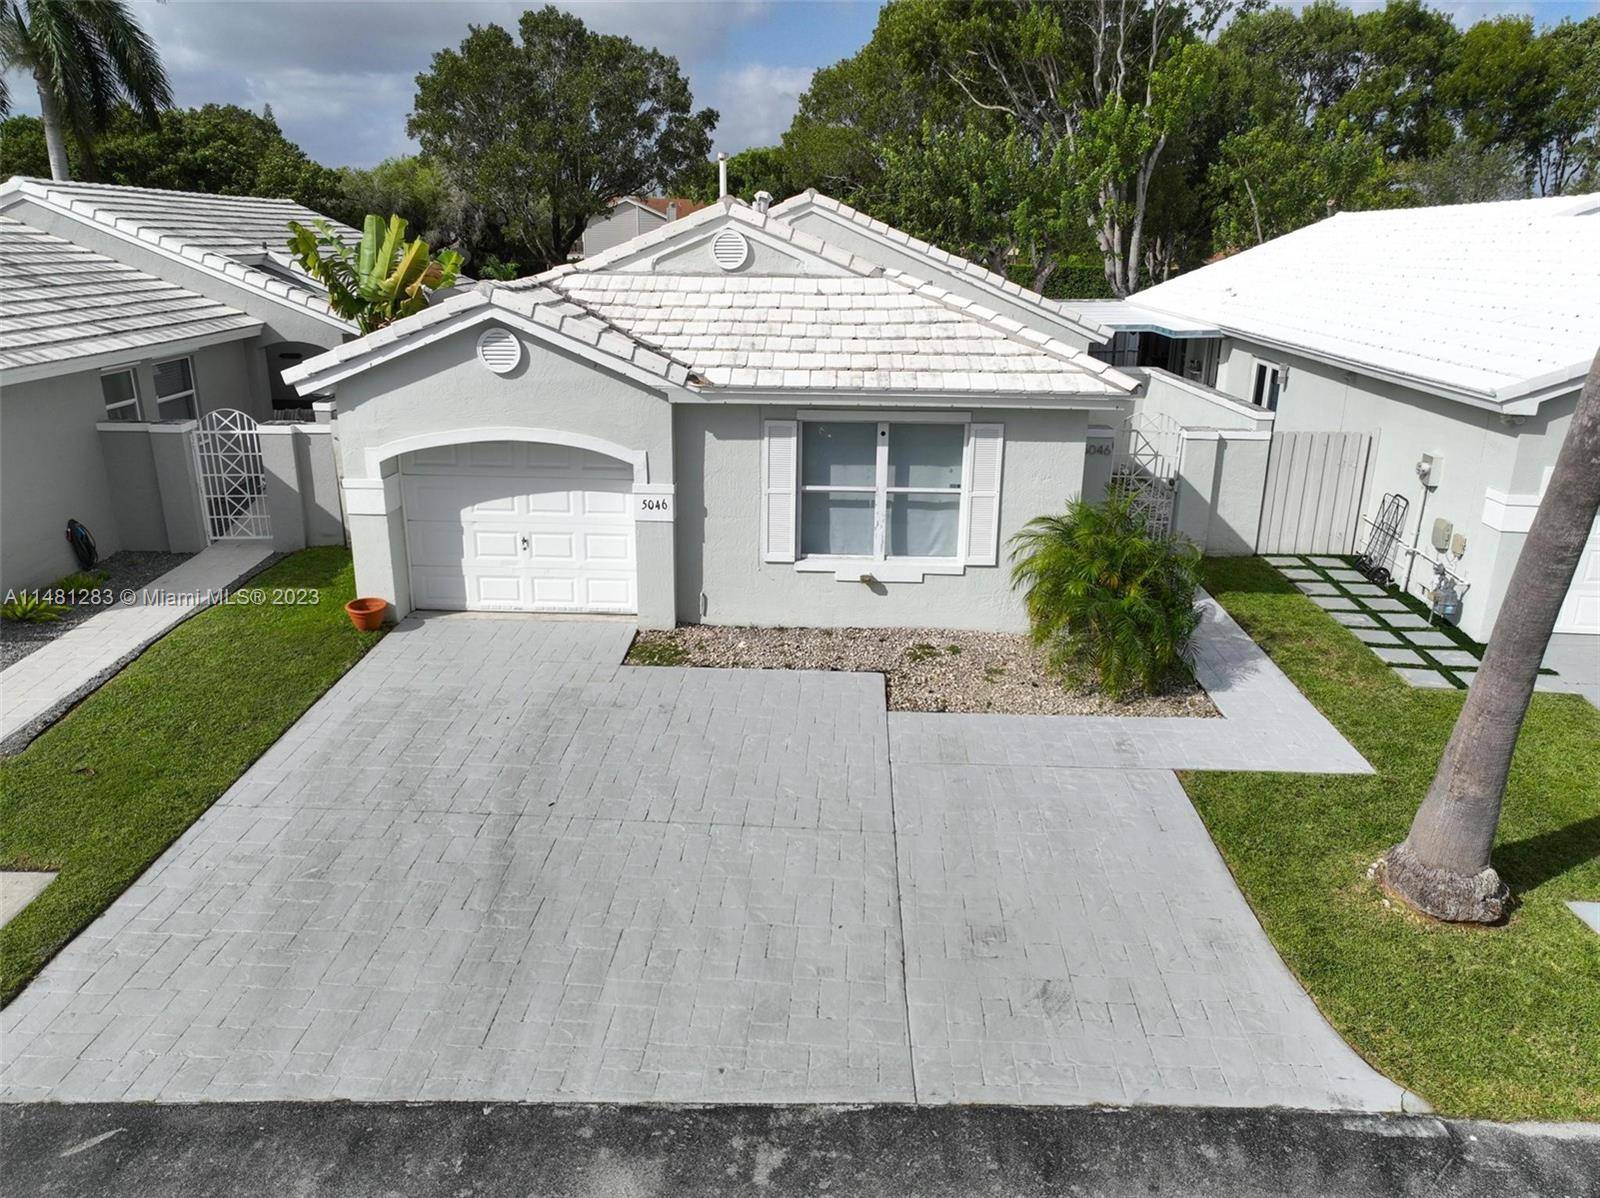 Welcome to this 3 bedroom, 2 bathroom home that is nestled in an family oriented community in West Kendall.